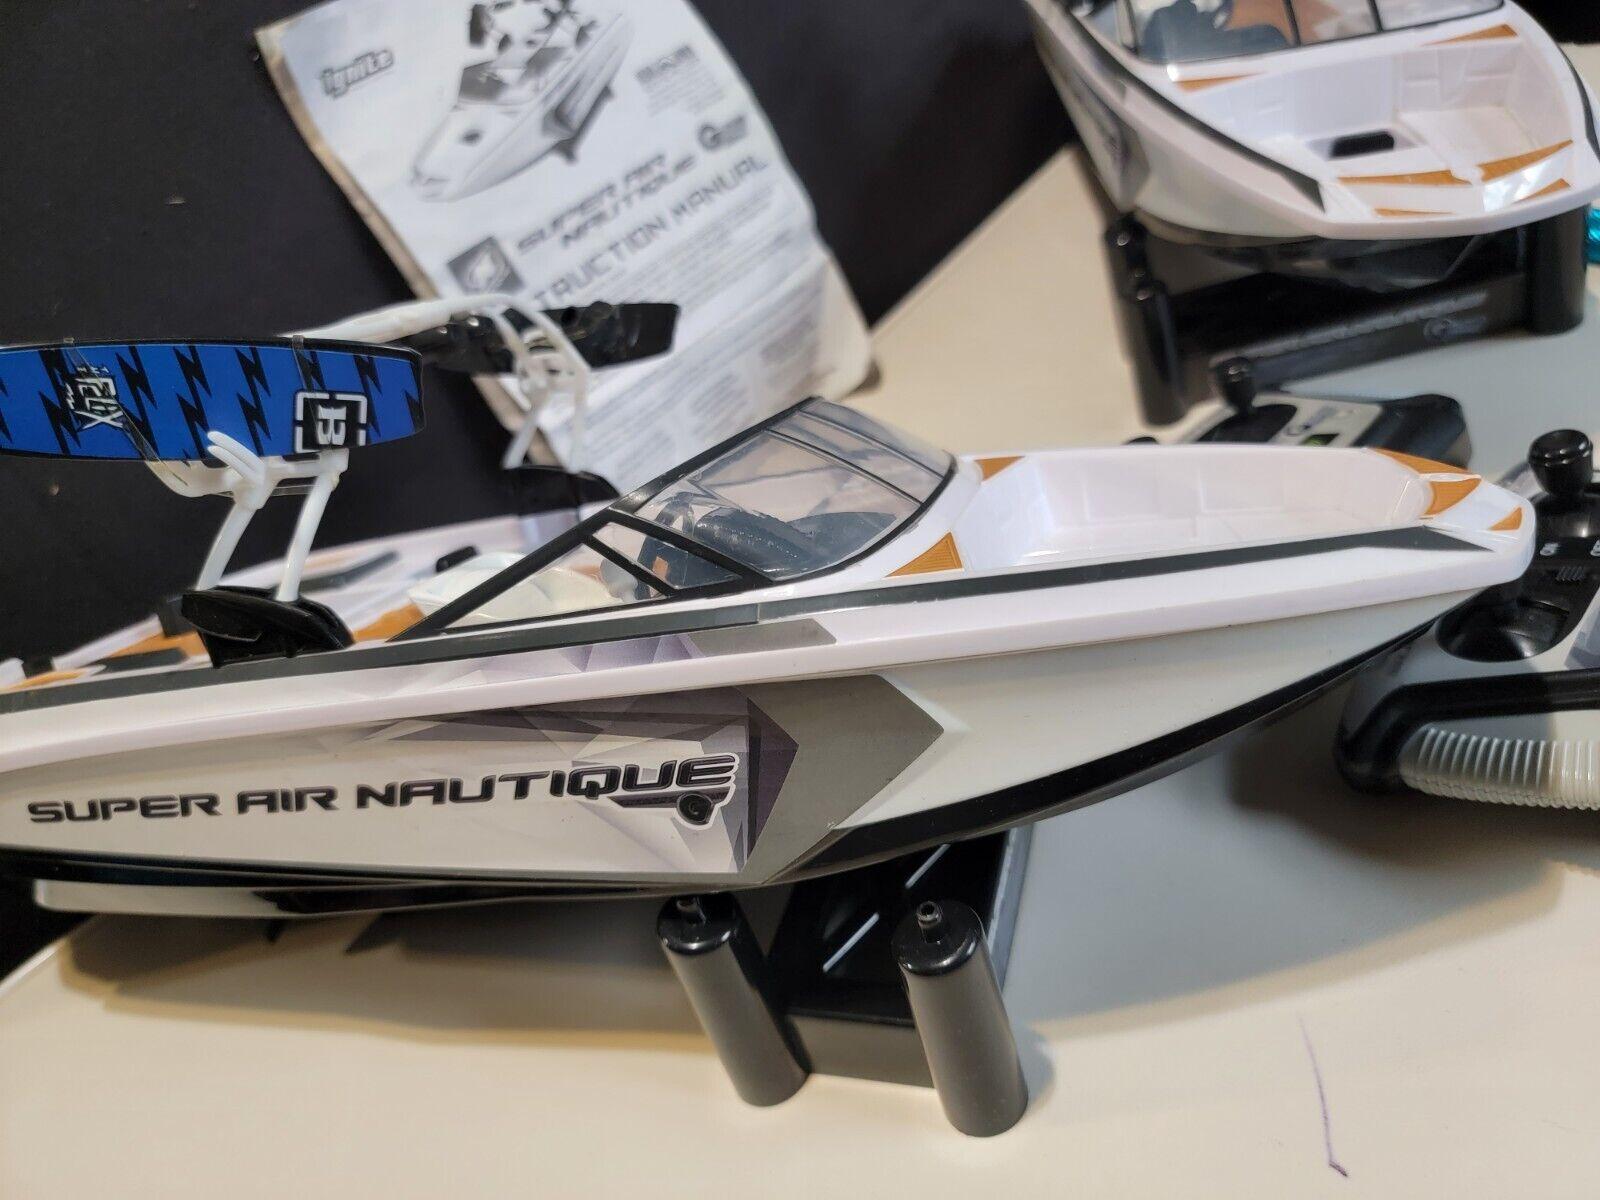 Nautique Rc Boat:  The benefits and drawbacks of owning a Nautique RC boat